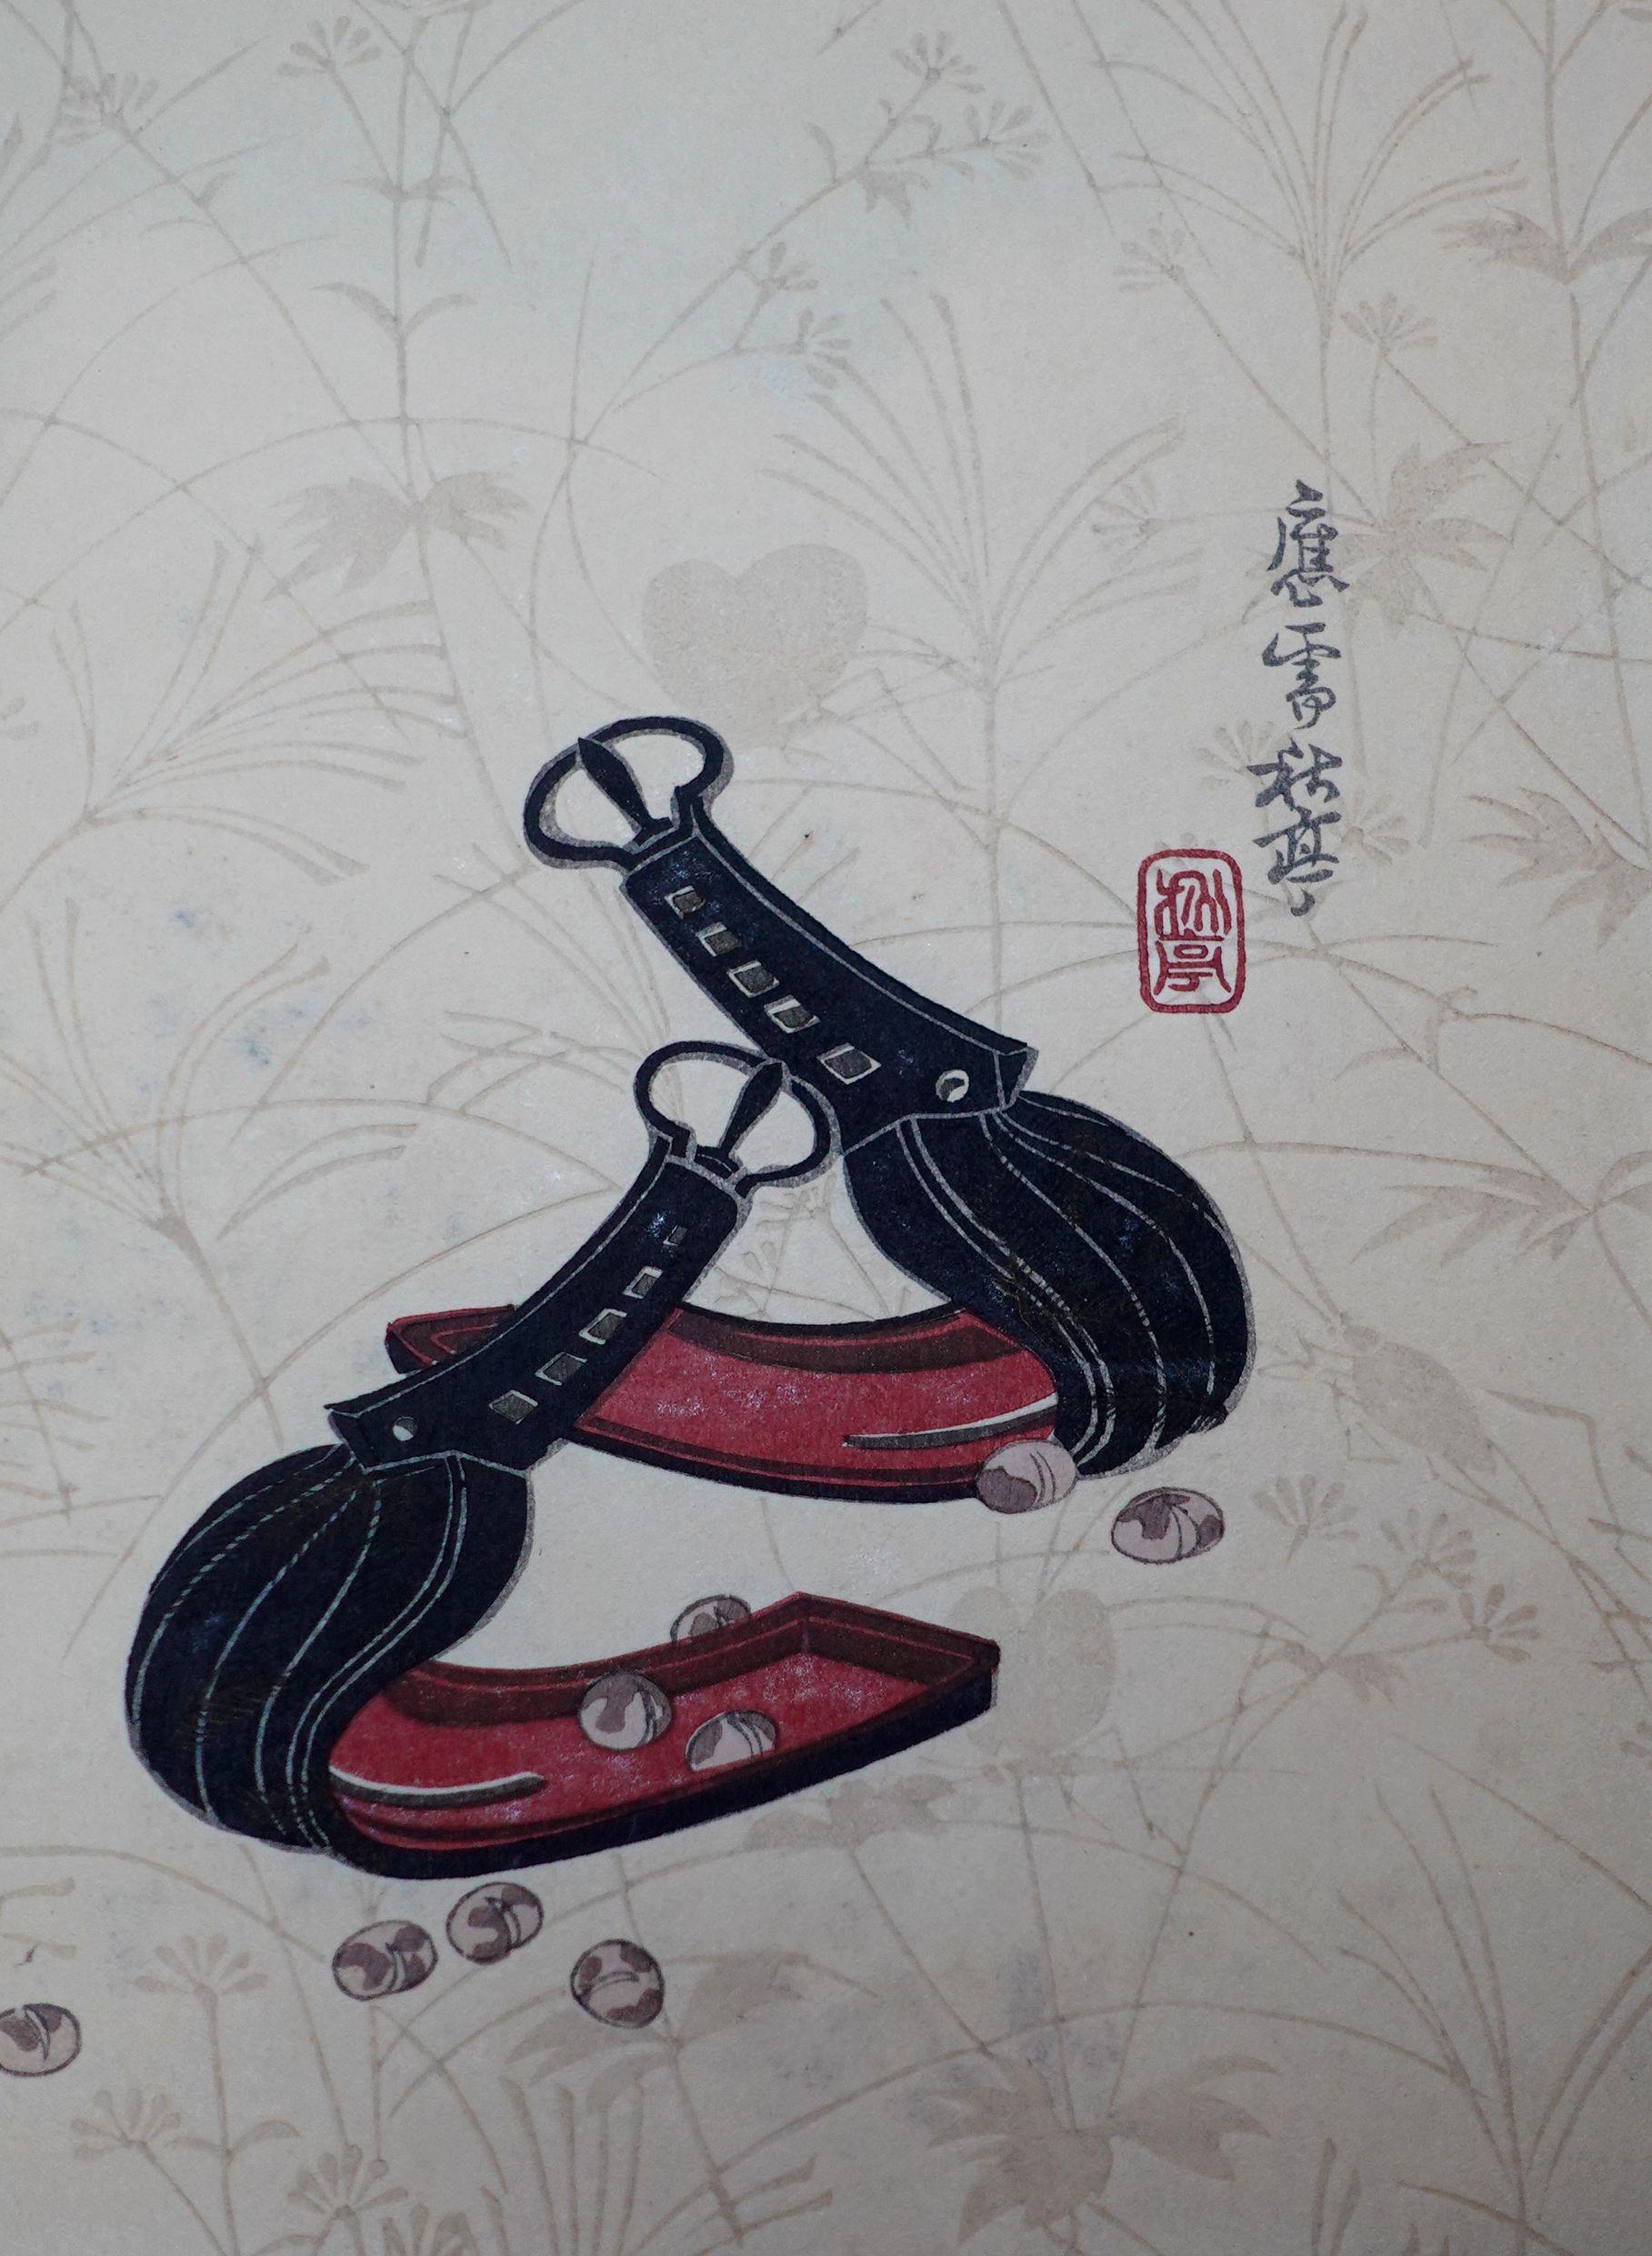 Hand-Painted Japanese Woodblock Print by Shûtei Tanaka '秋亭' For Sale